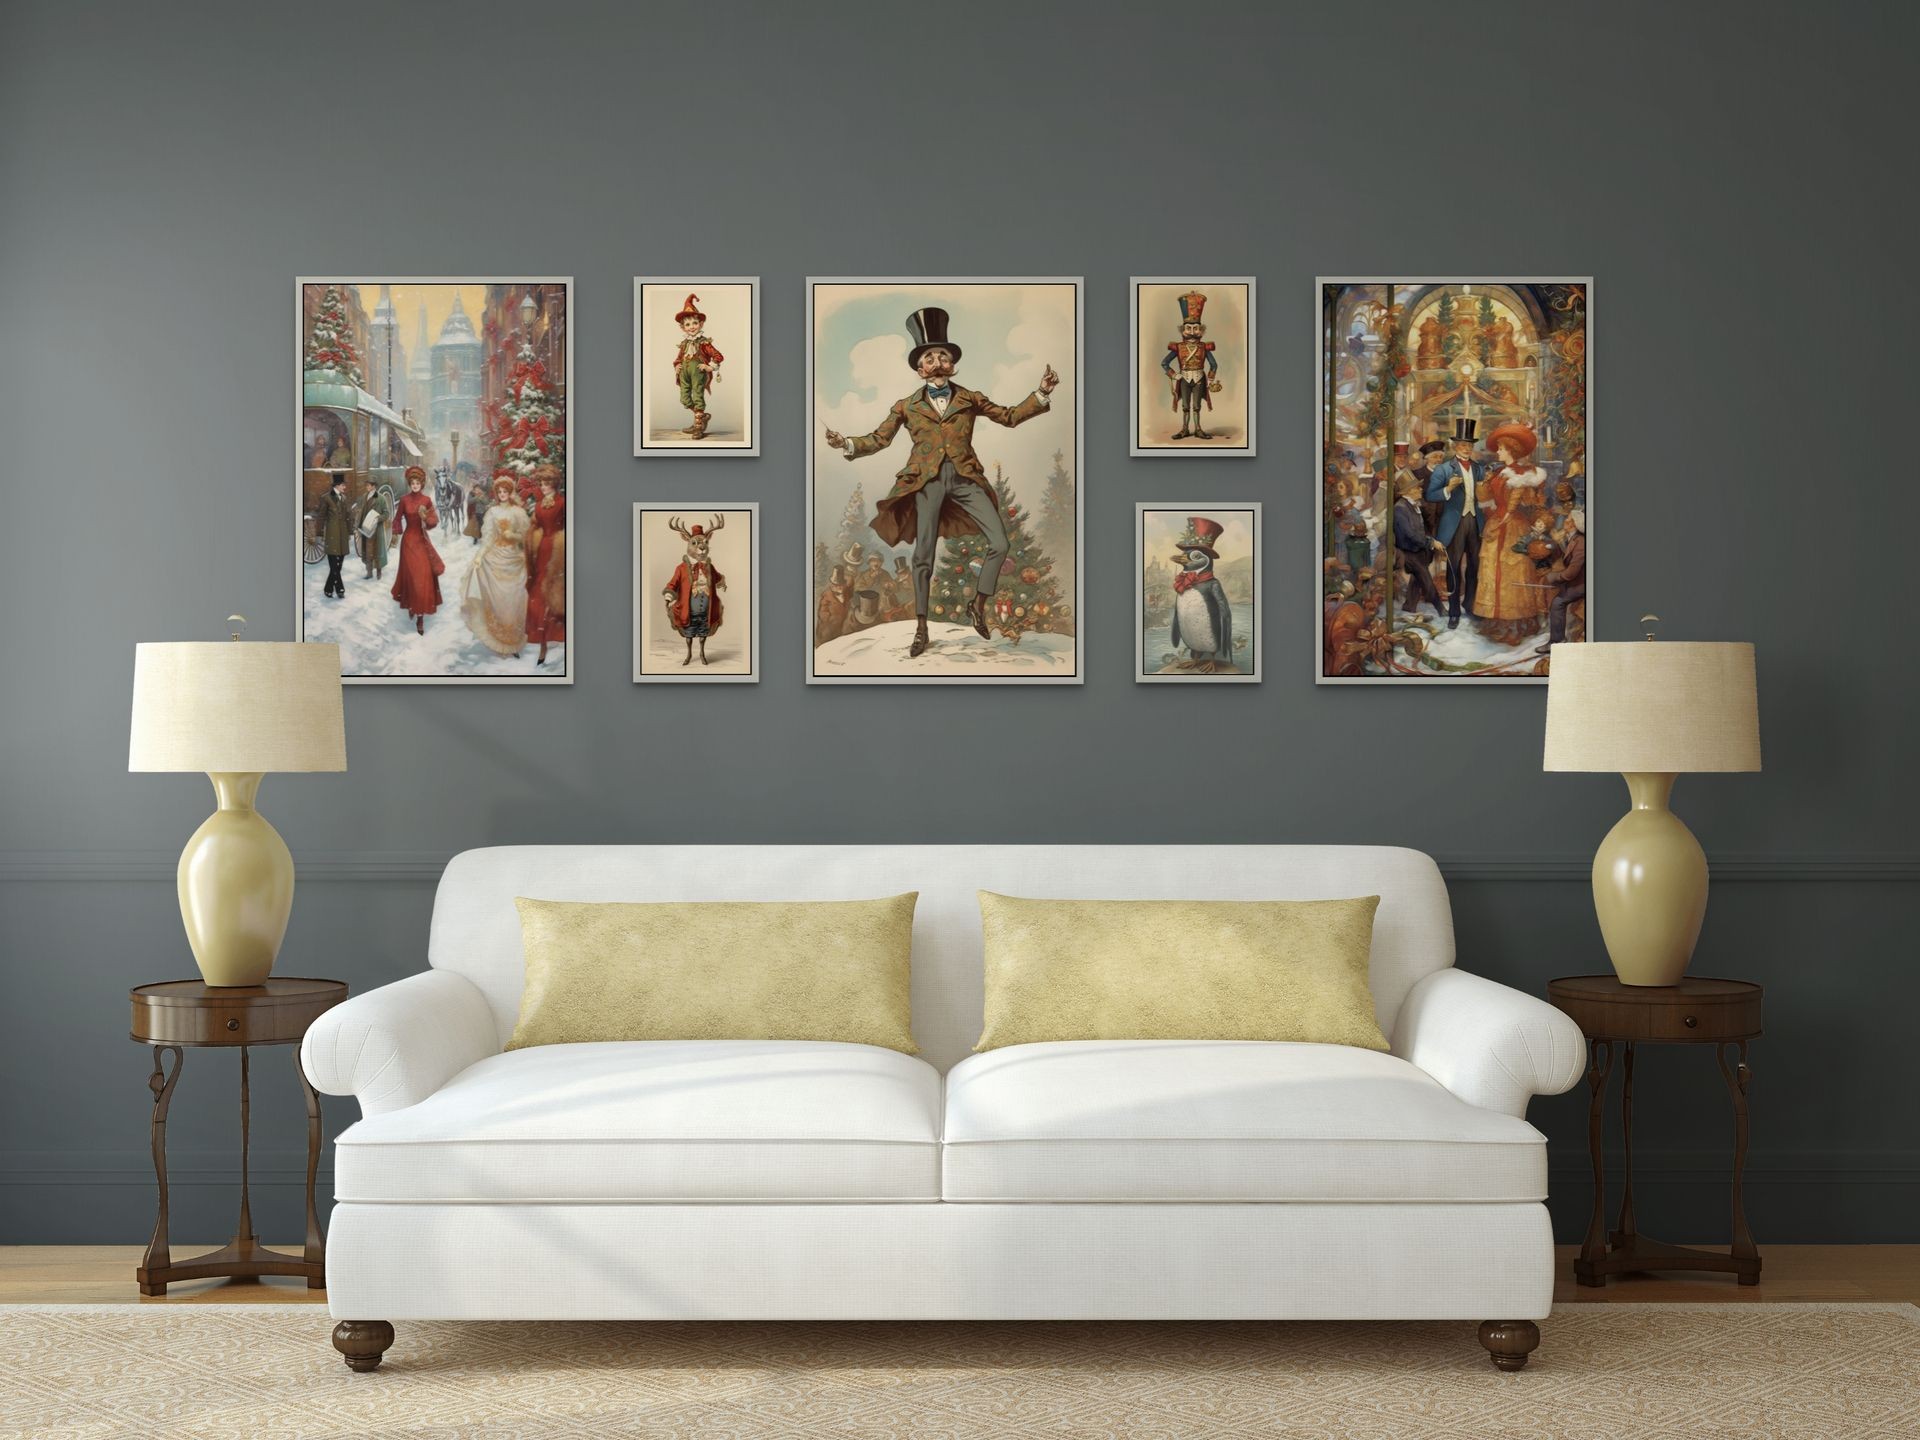 Tips for Creating a Gallery Wall with Digital Prints